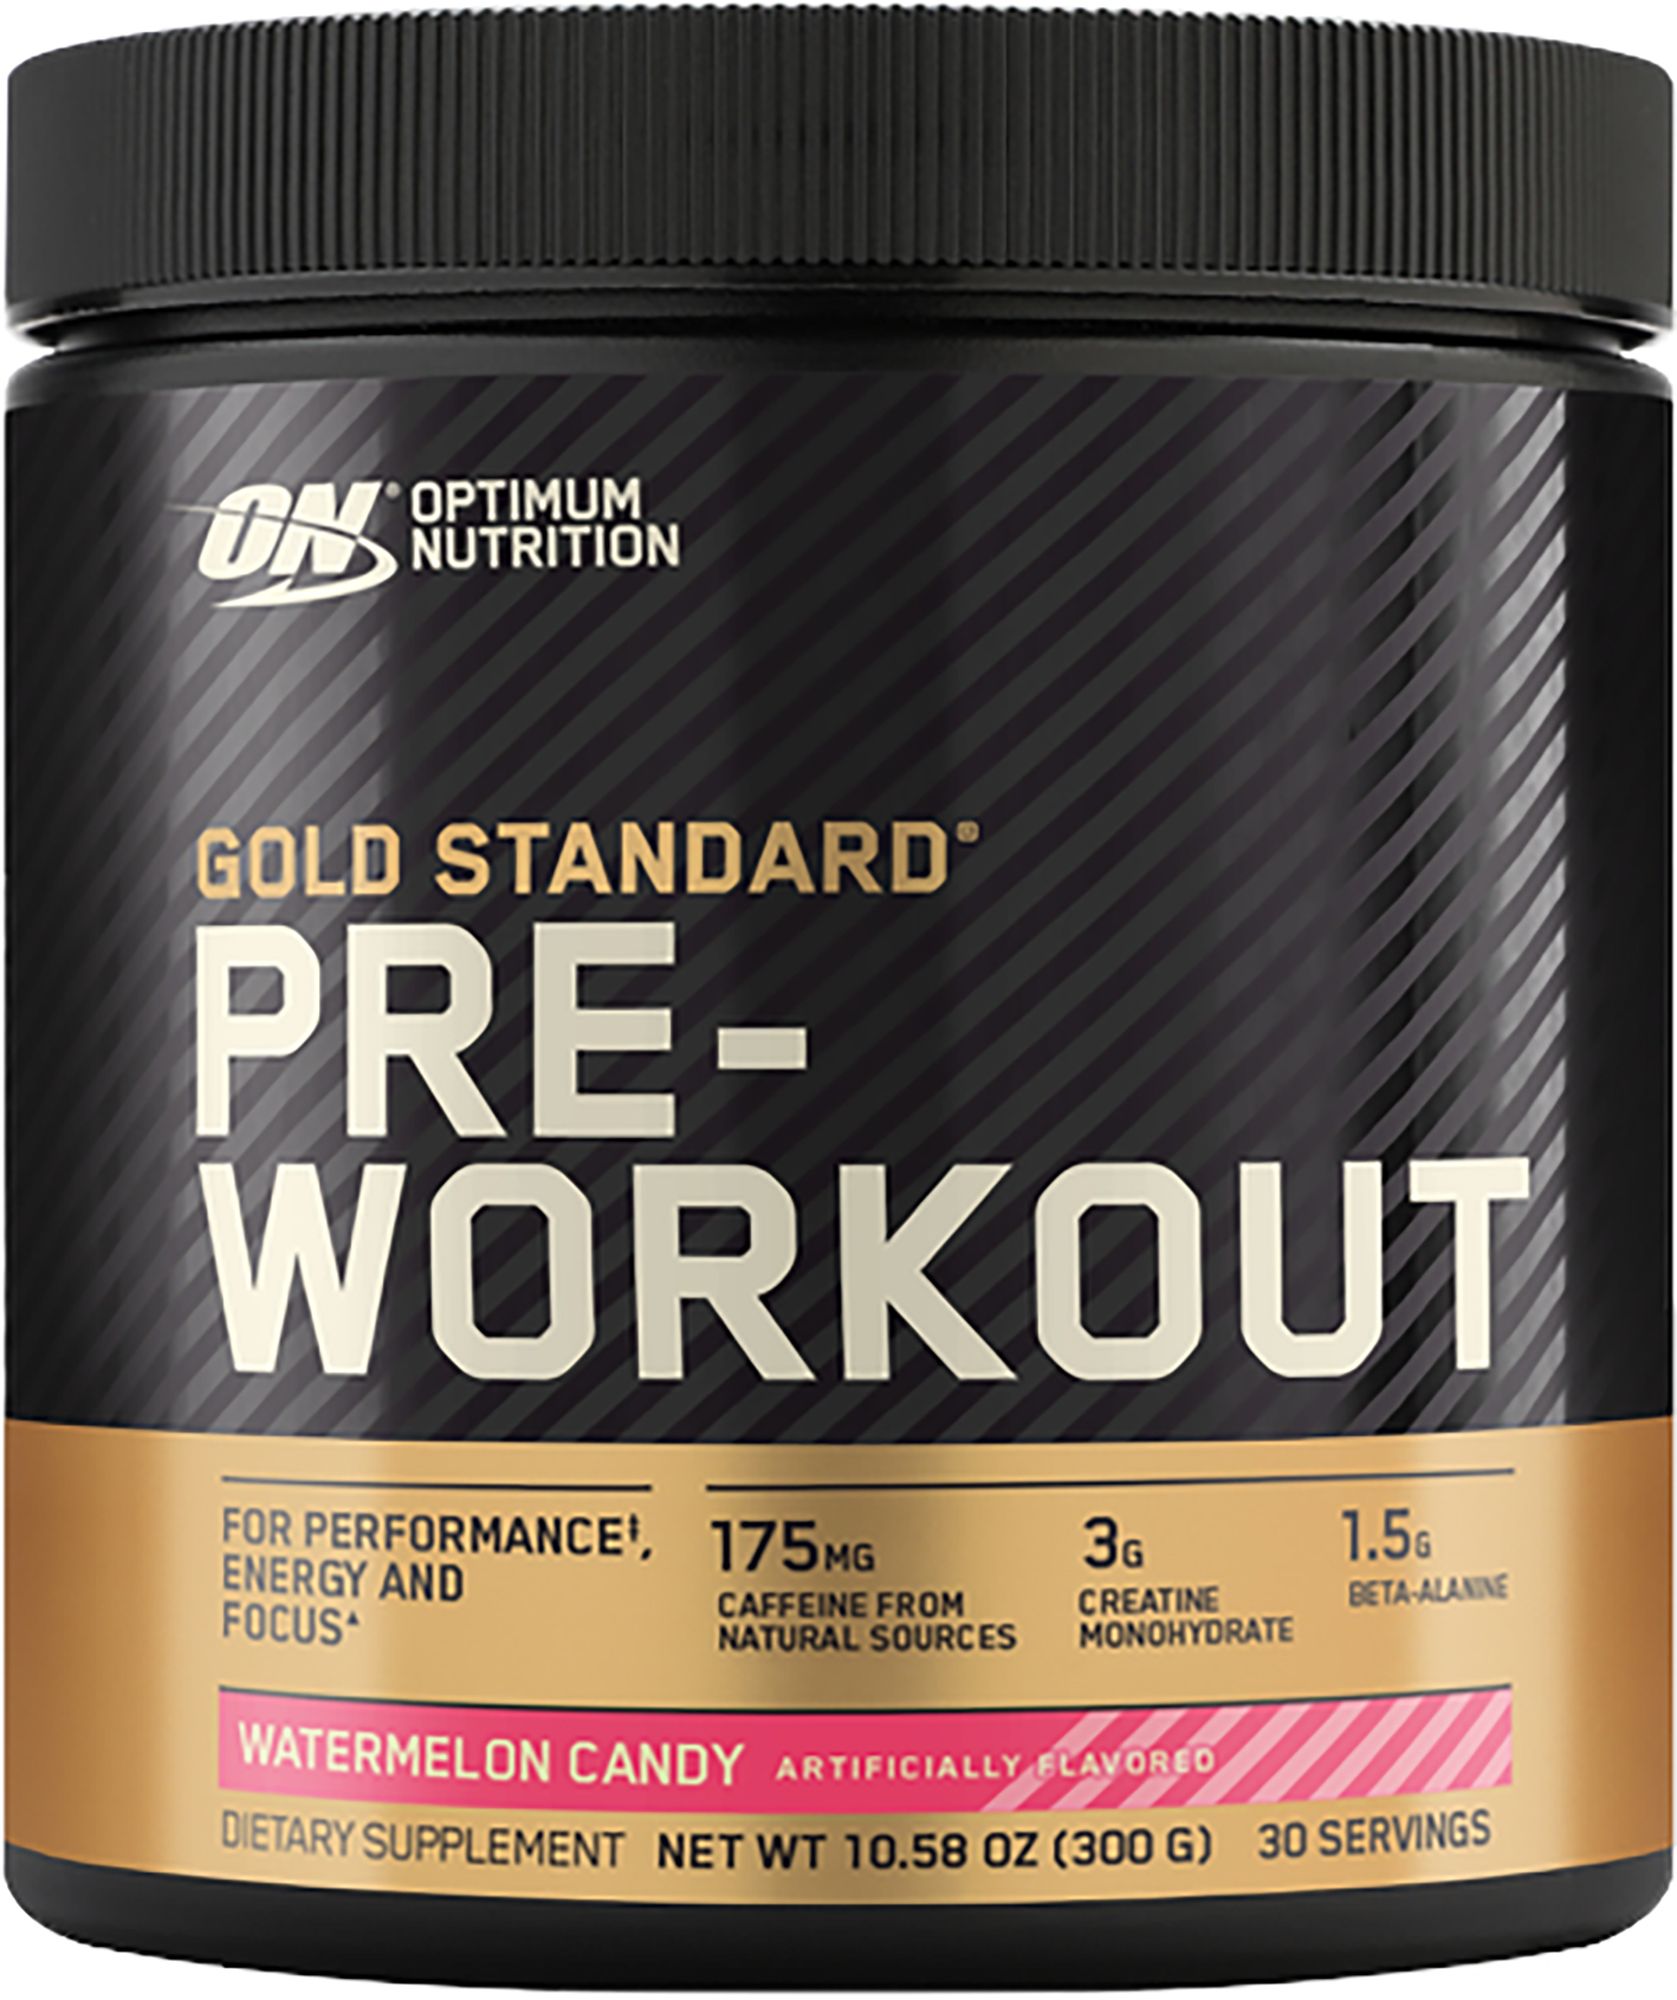 Protein Powder Sports Nutrition Best Price Guarantee At